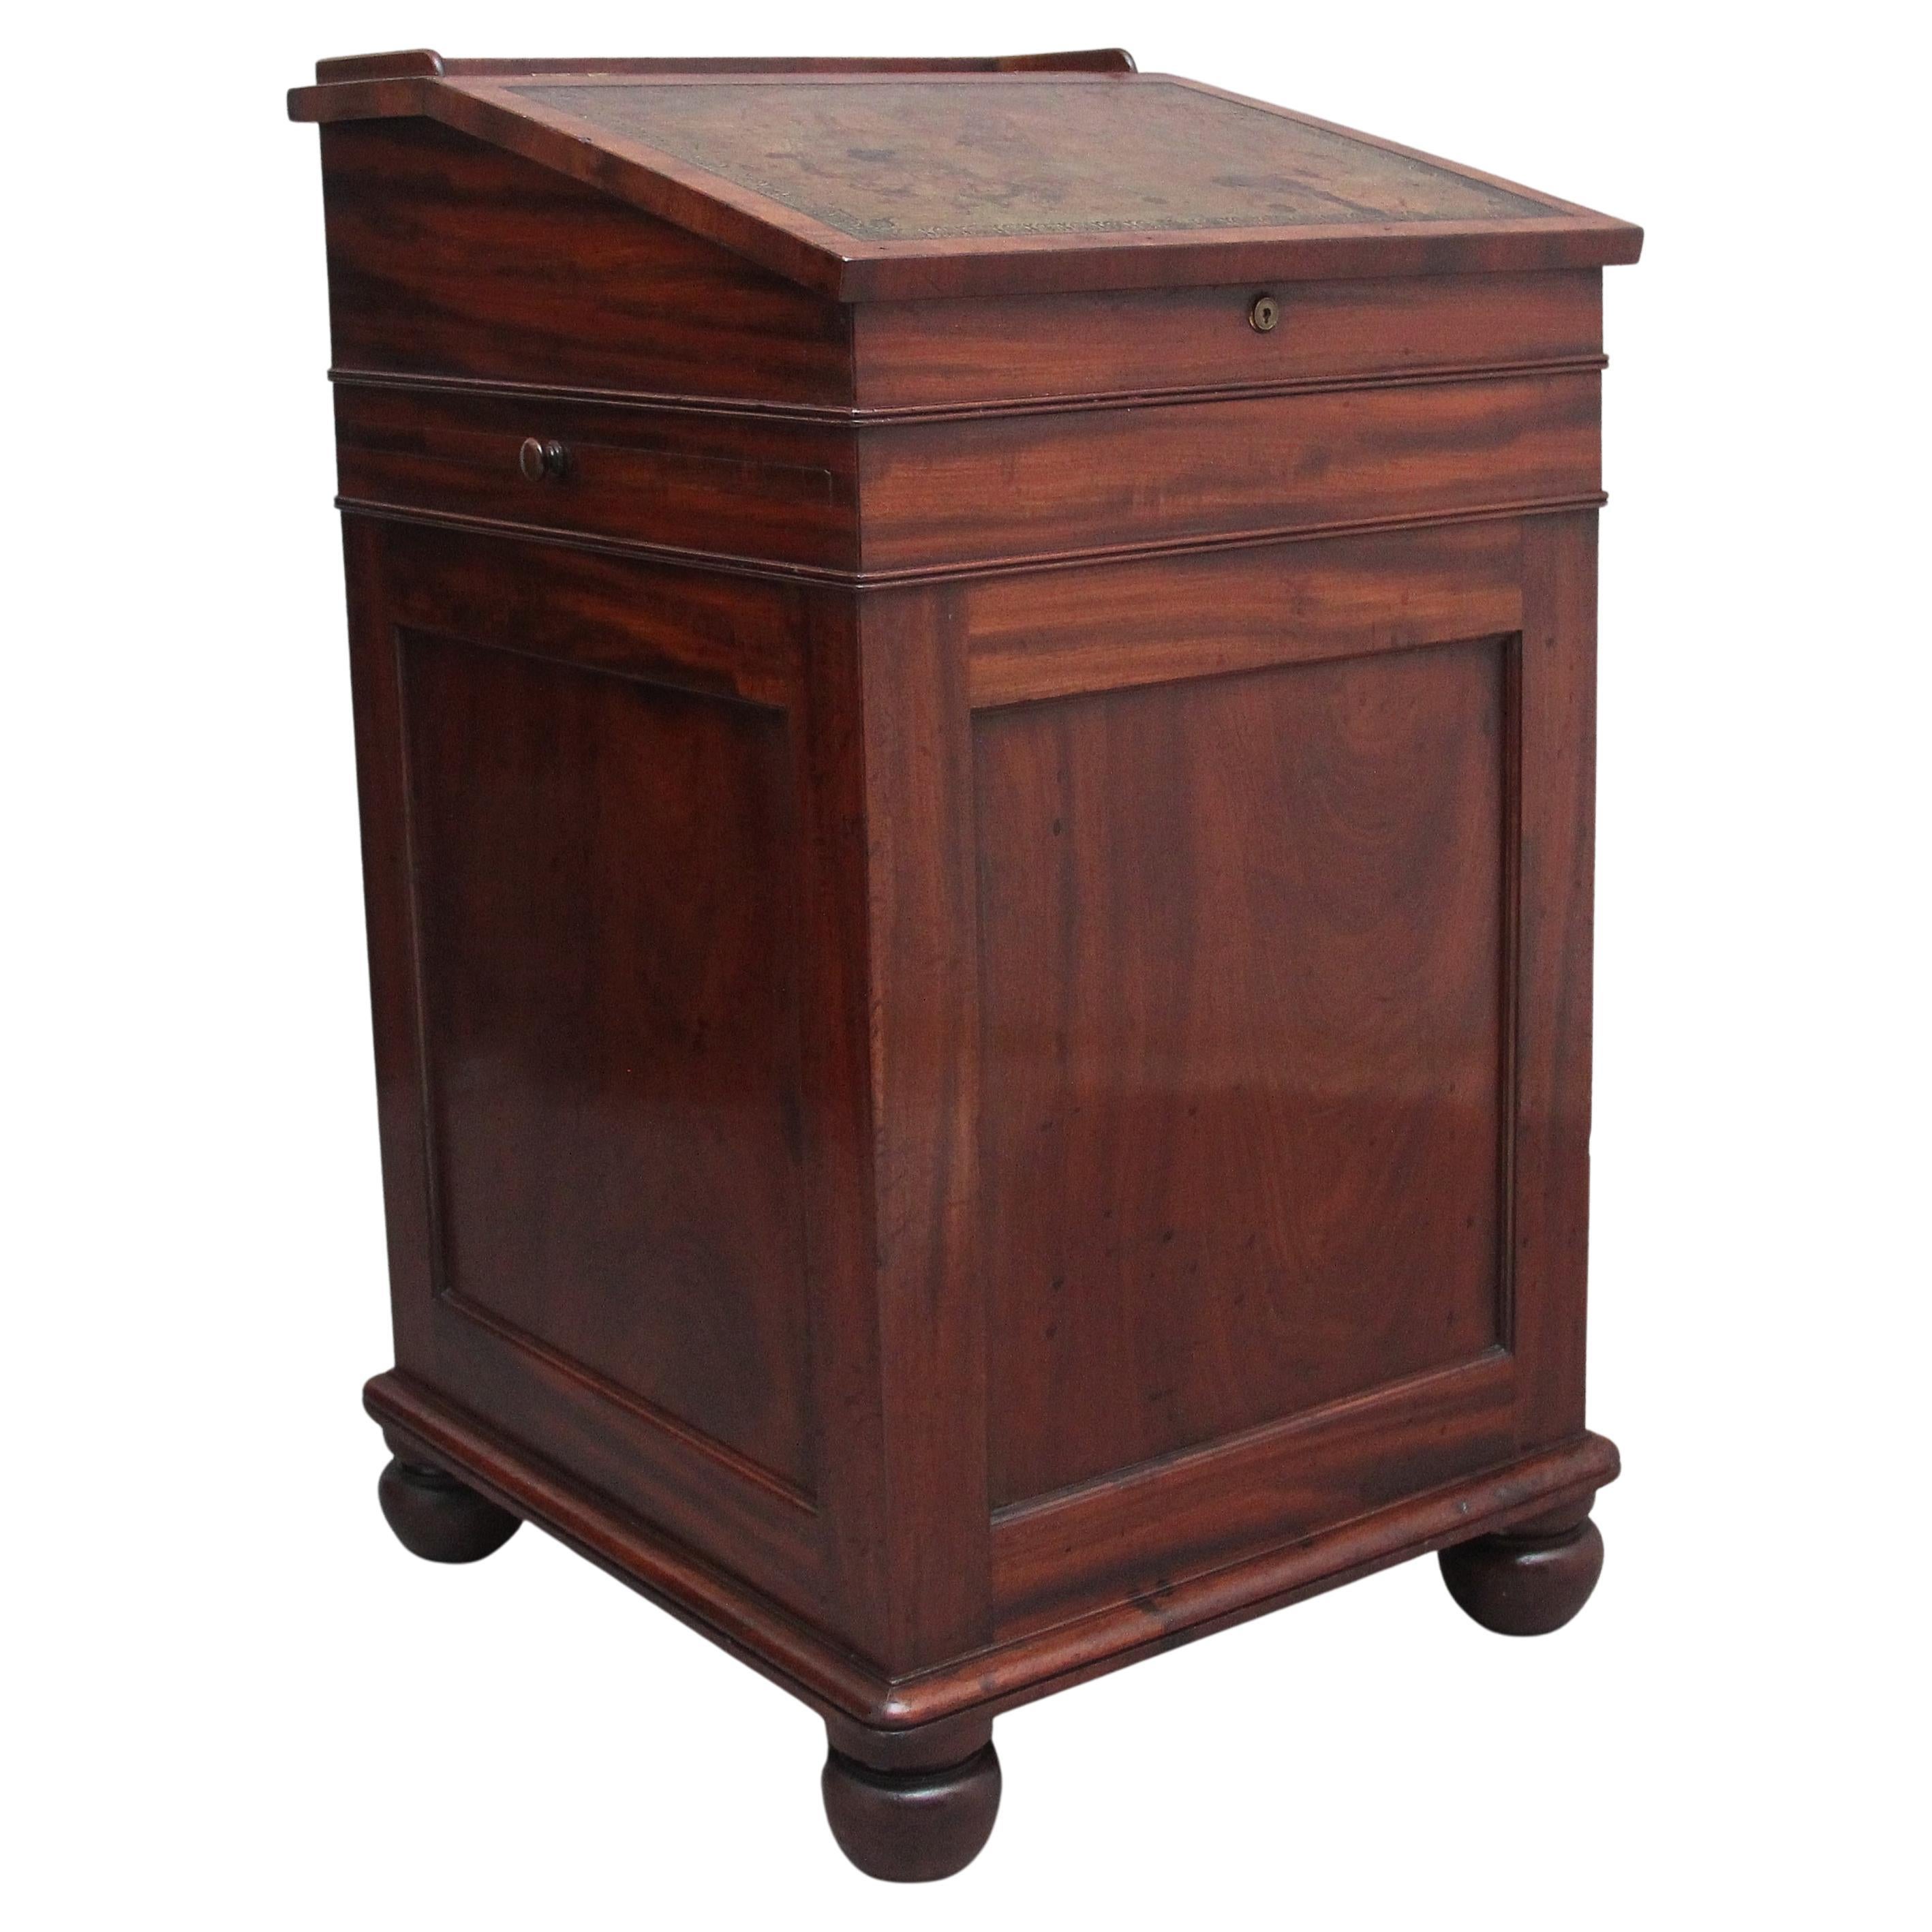 Early 19th Century Mahogany Davenport by Gillows of Lancaster